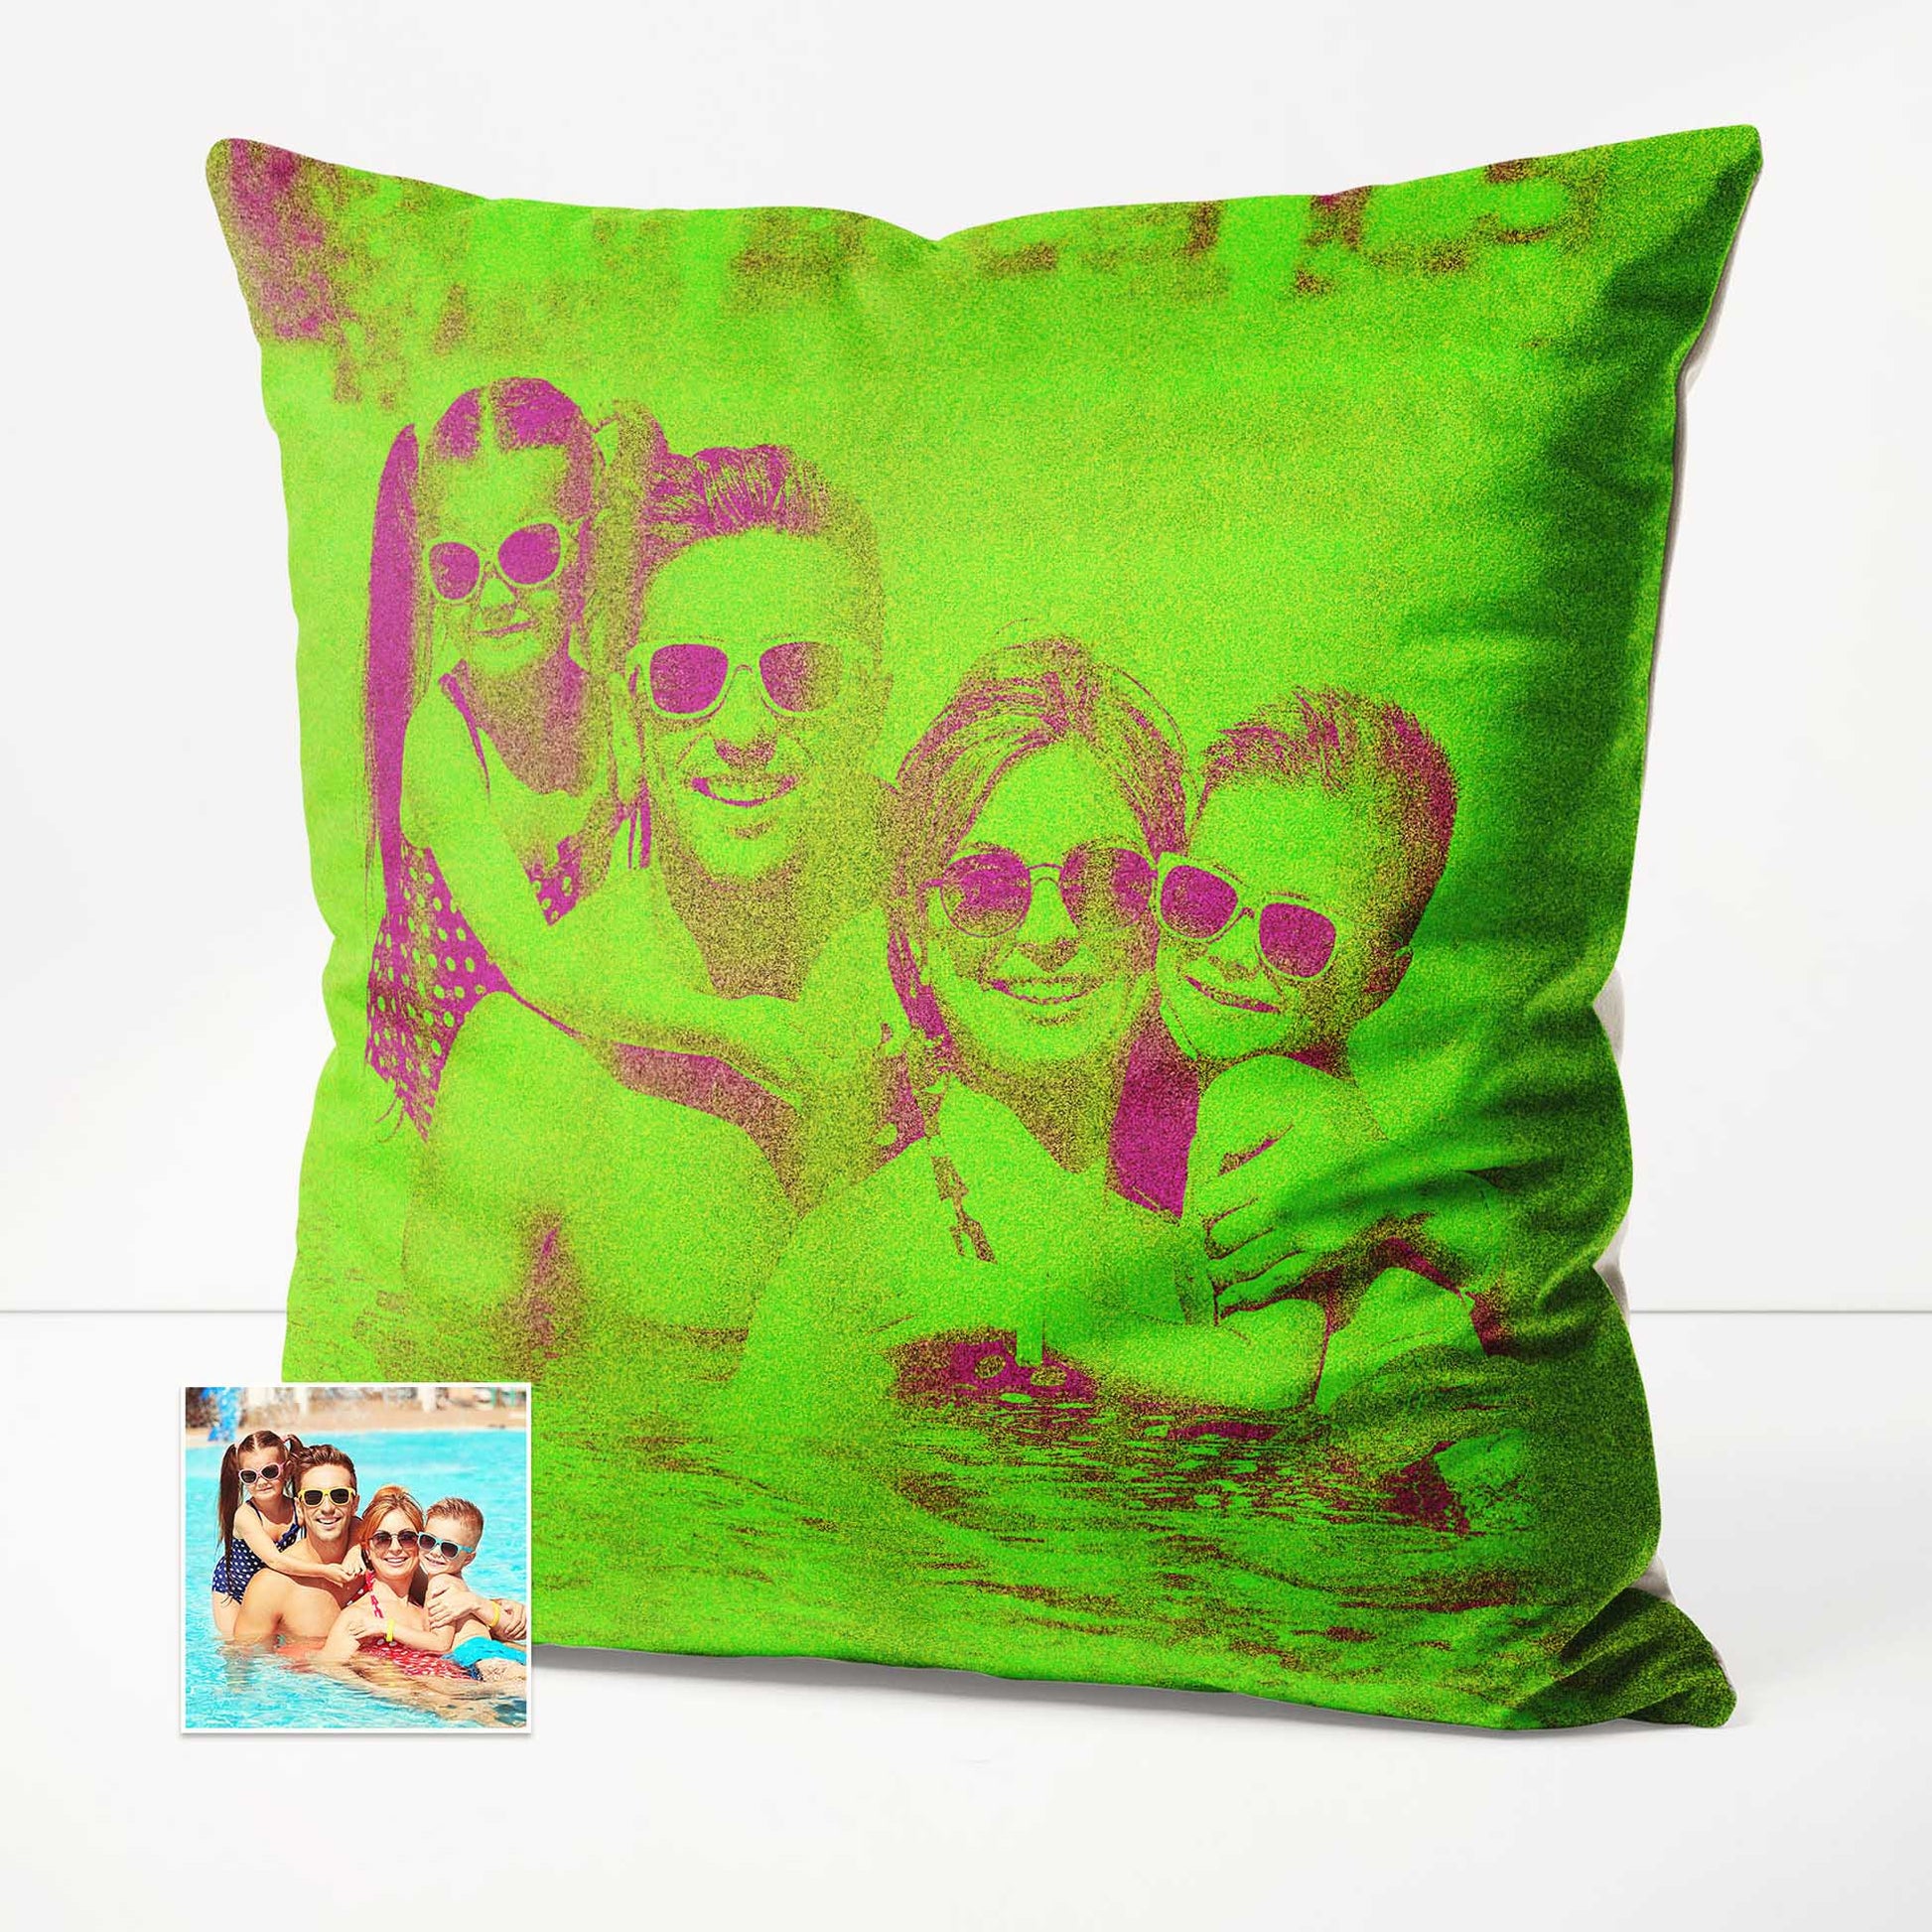 Let the Personalised Neon Green Cushion inject a burst of joy and happiness into your space. Its fresh and fun design creates a party-like atmosphere that is sure to make a statement. Crafted from soft velvet and handmade with precision